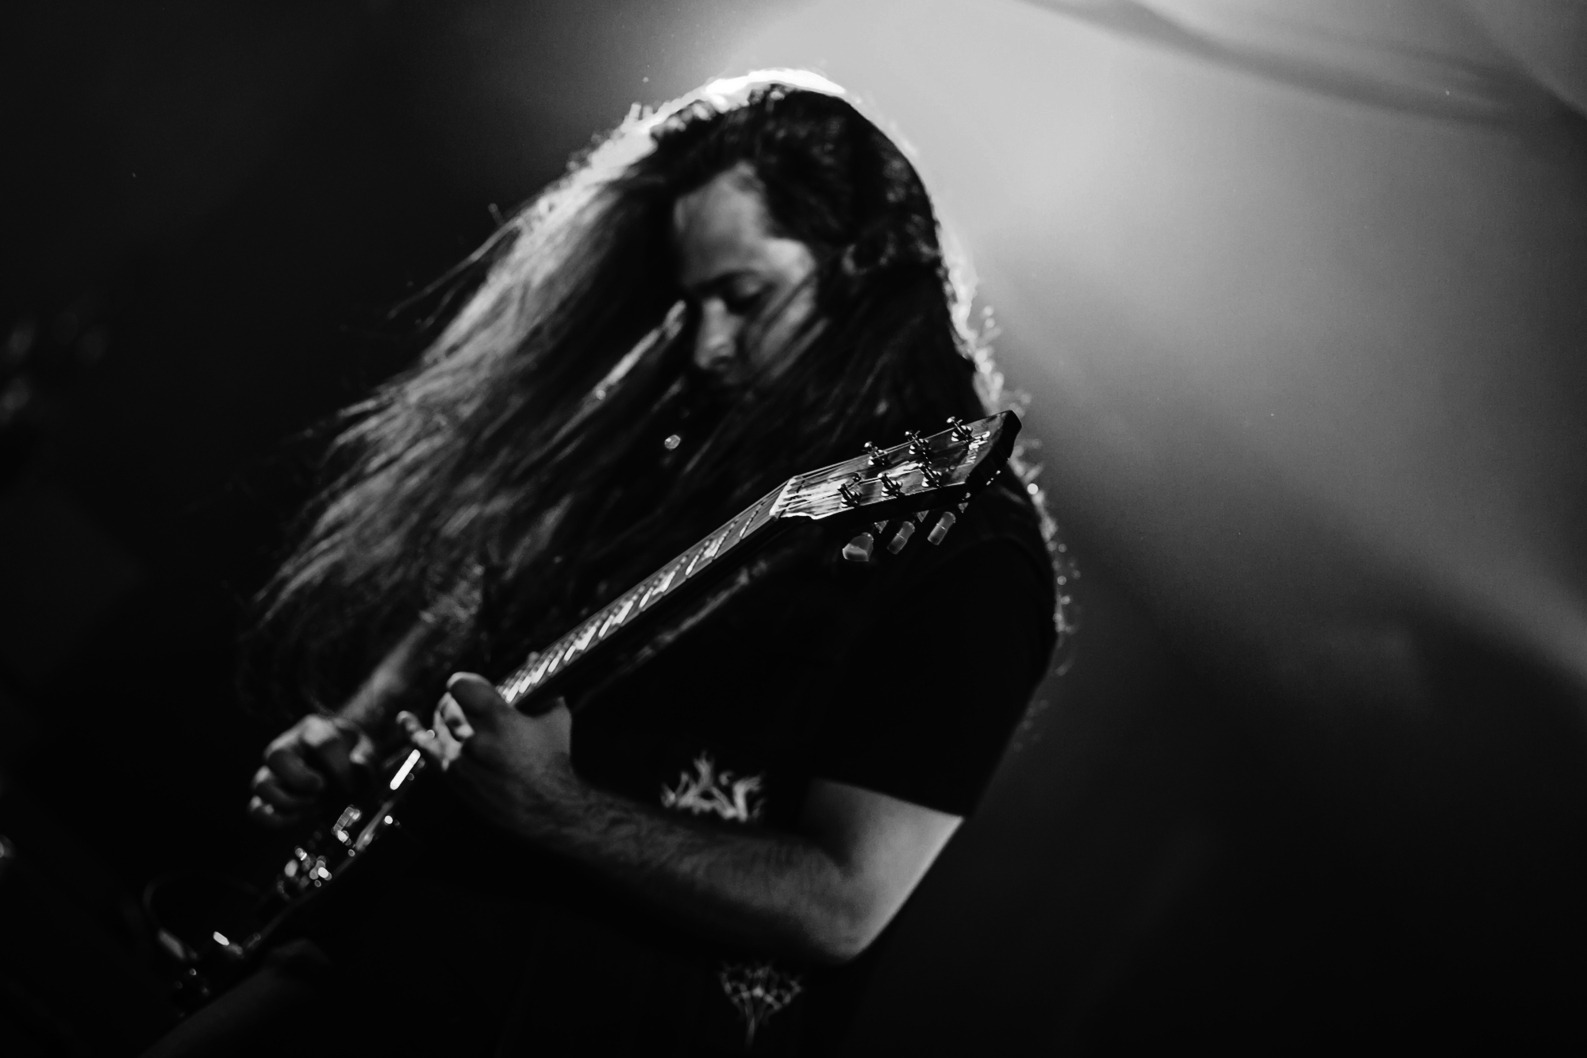 You are currently viewing Black Metallers SELBST announce new album “Despondency Chord Progressions” and released first single “Chant Of Self Confrontation”.